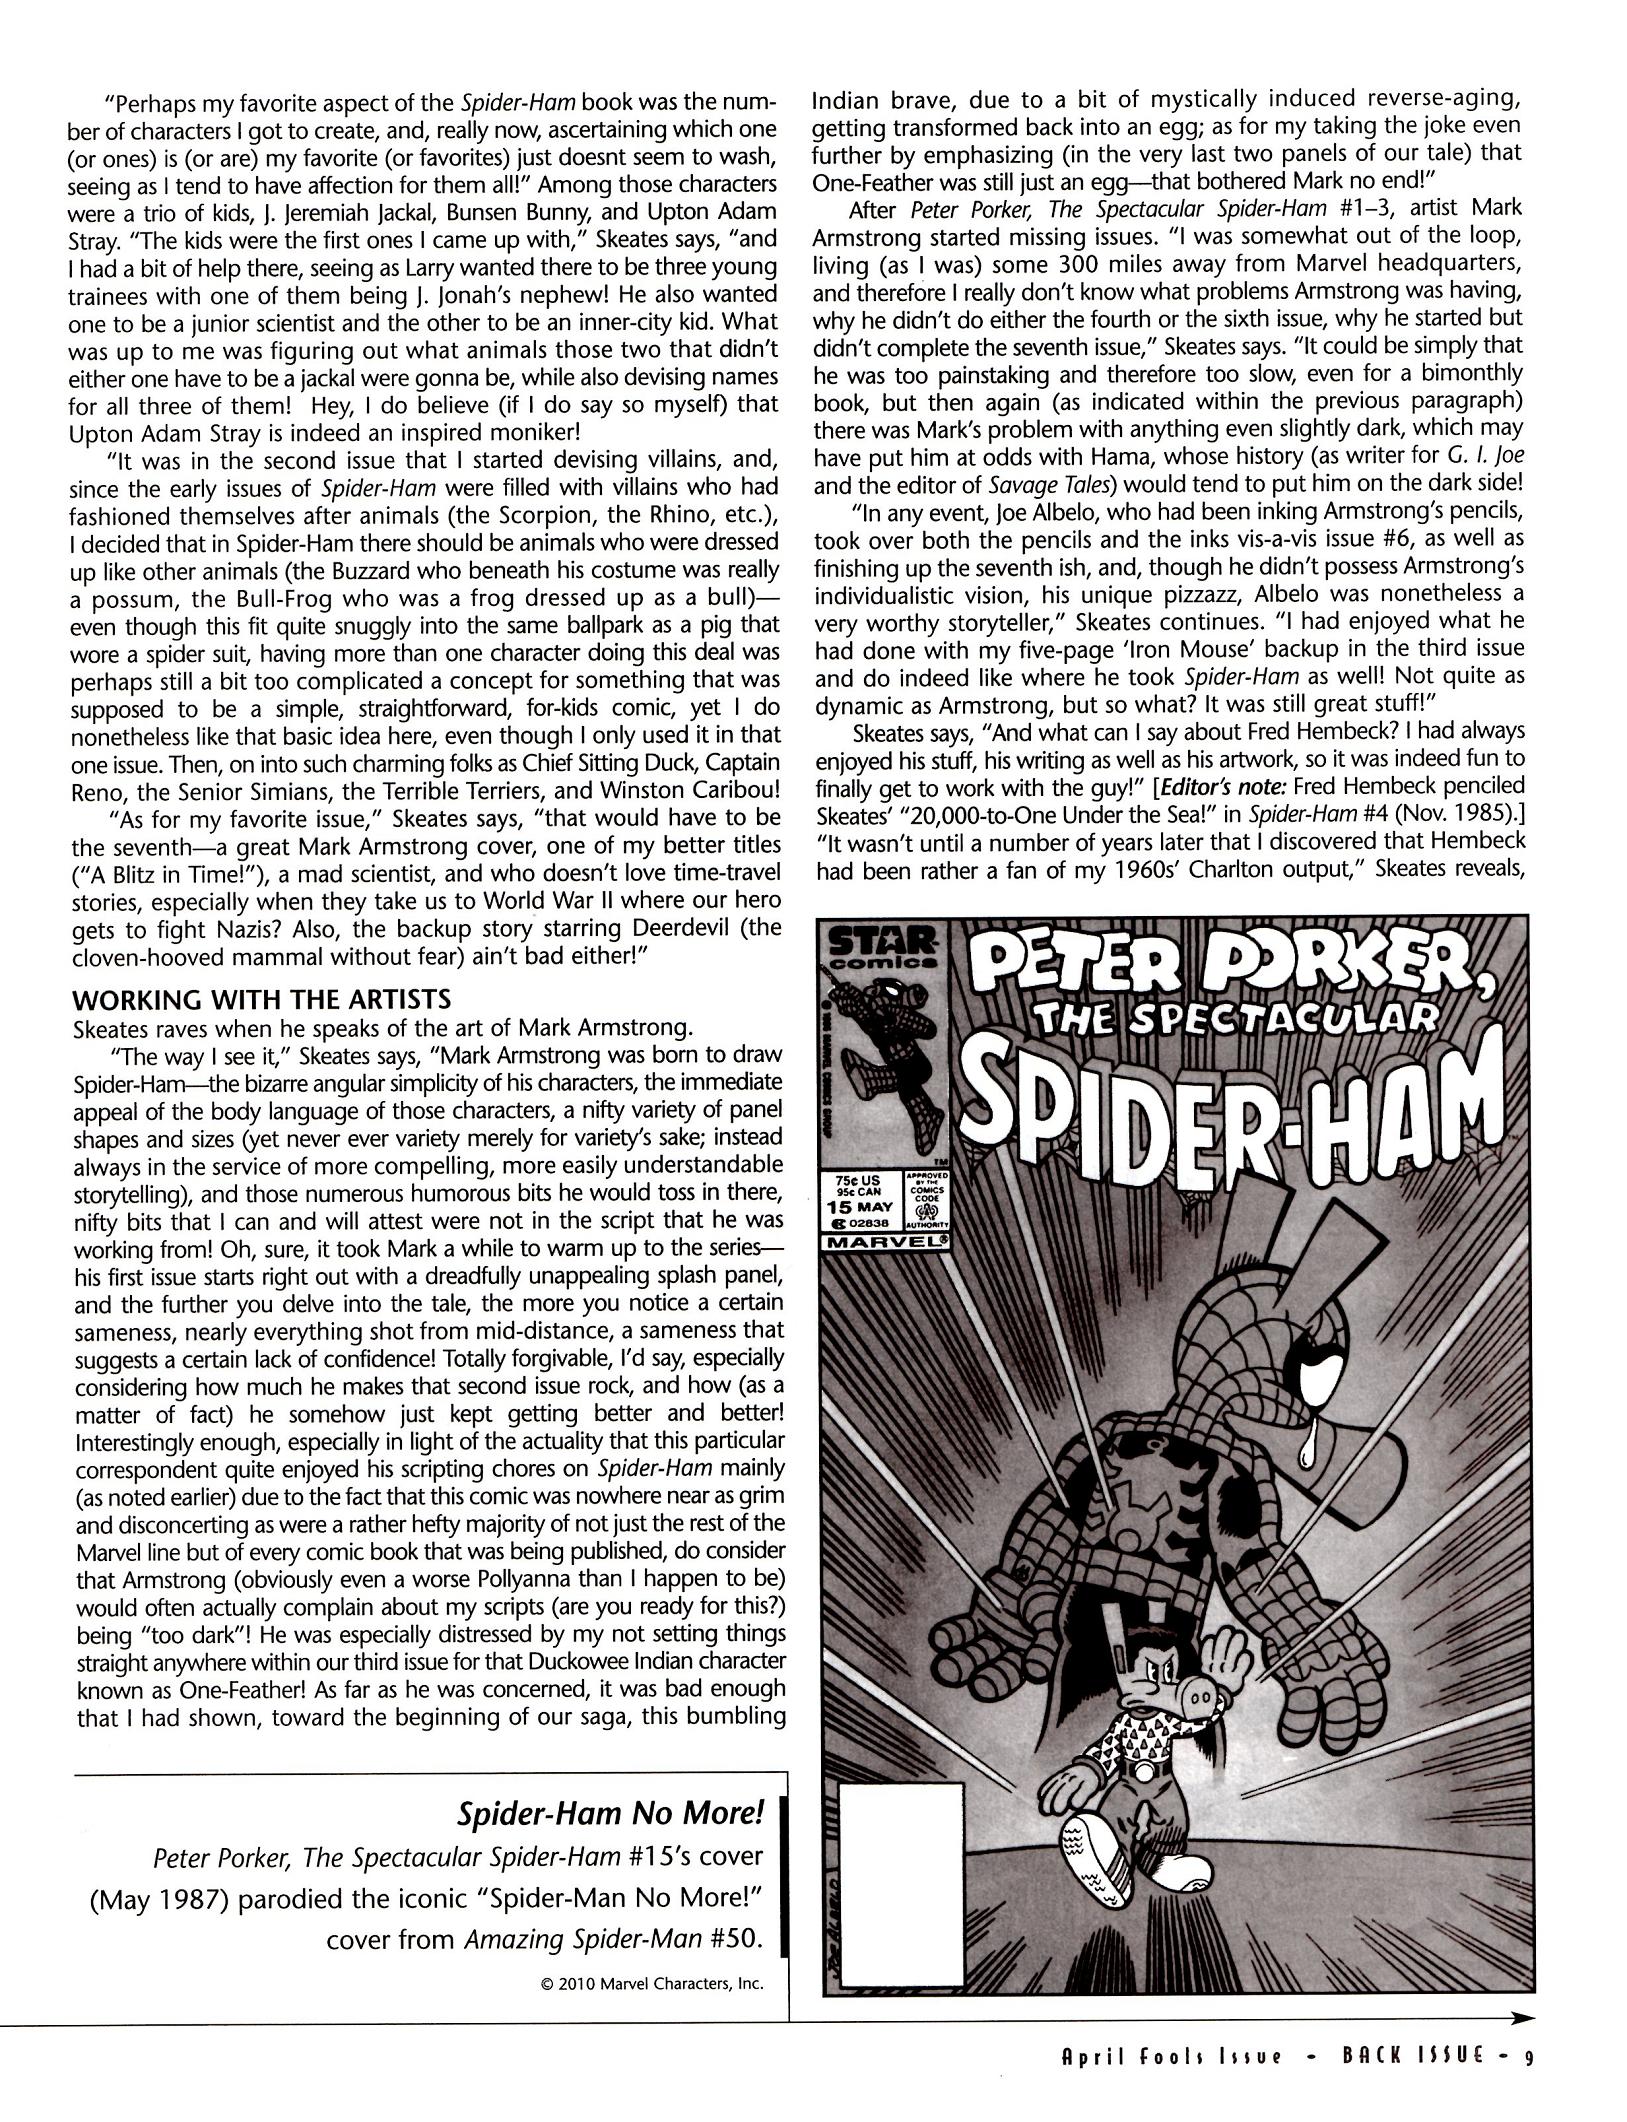 Read online Back Issue comic -  Issue #39 - 11